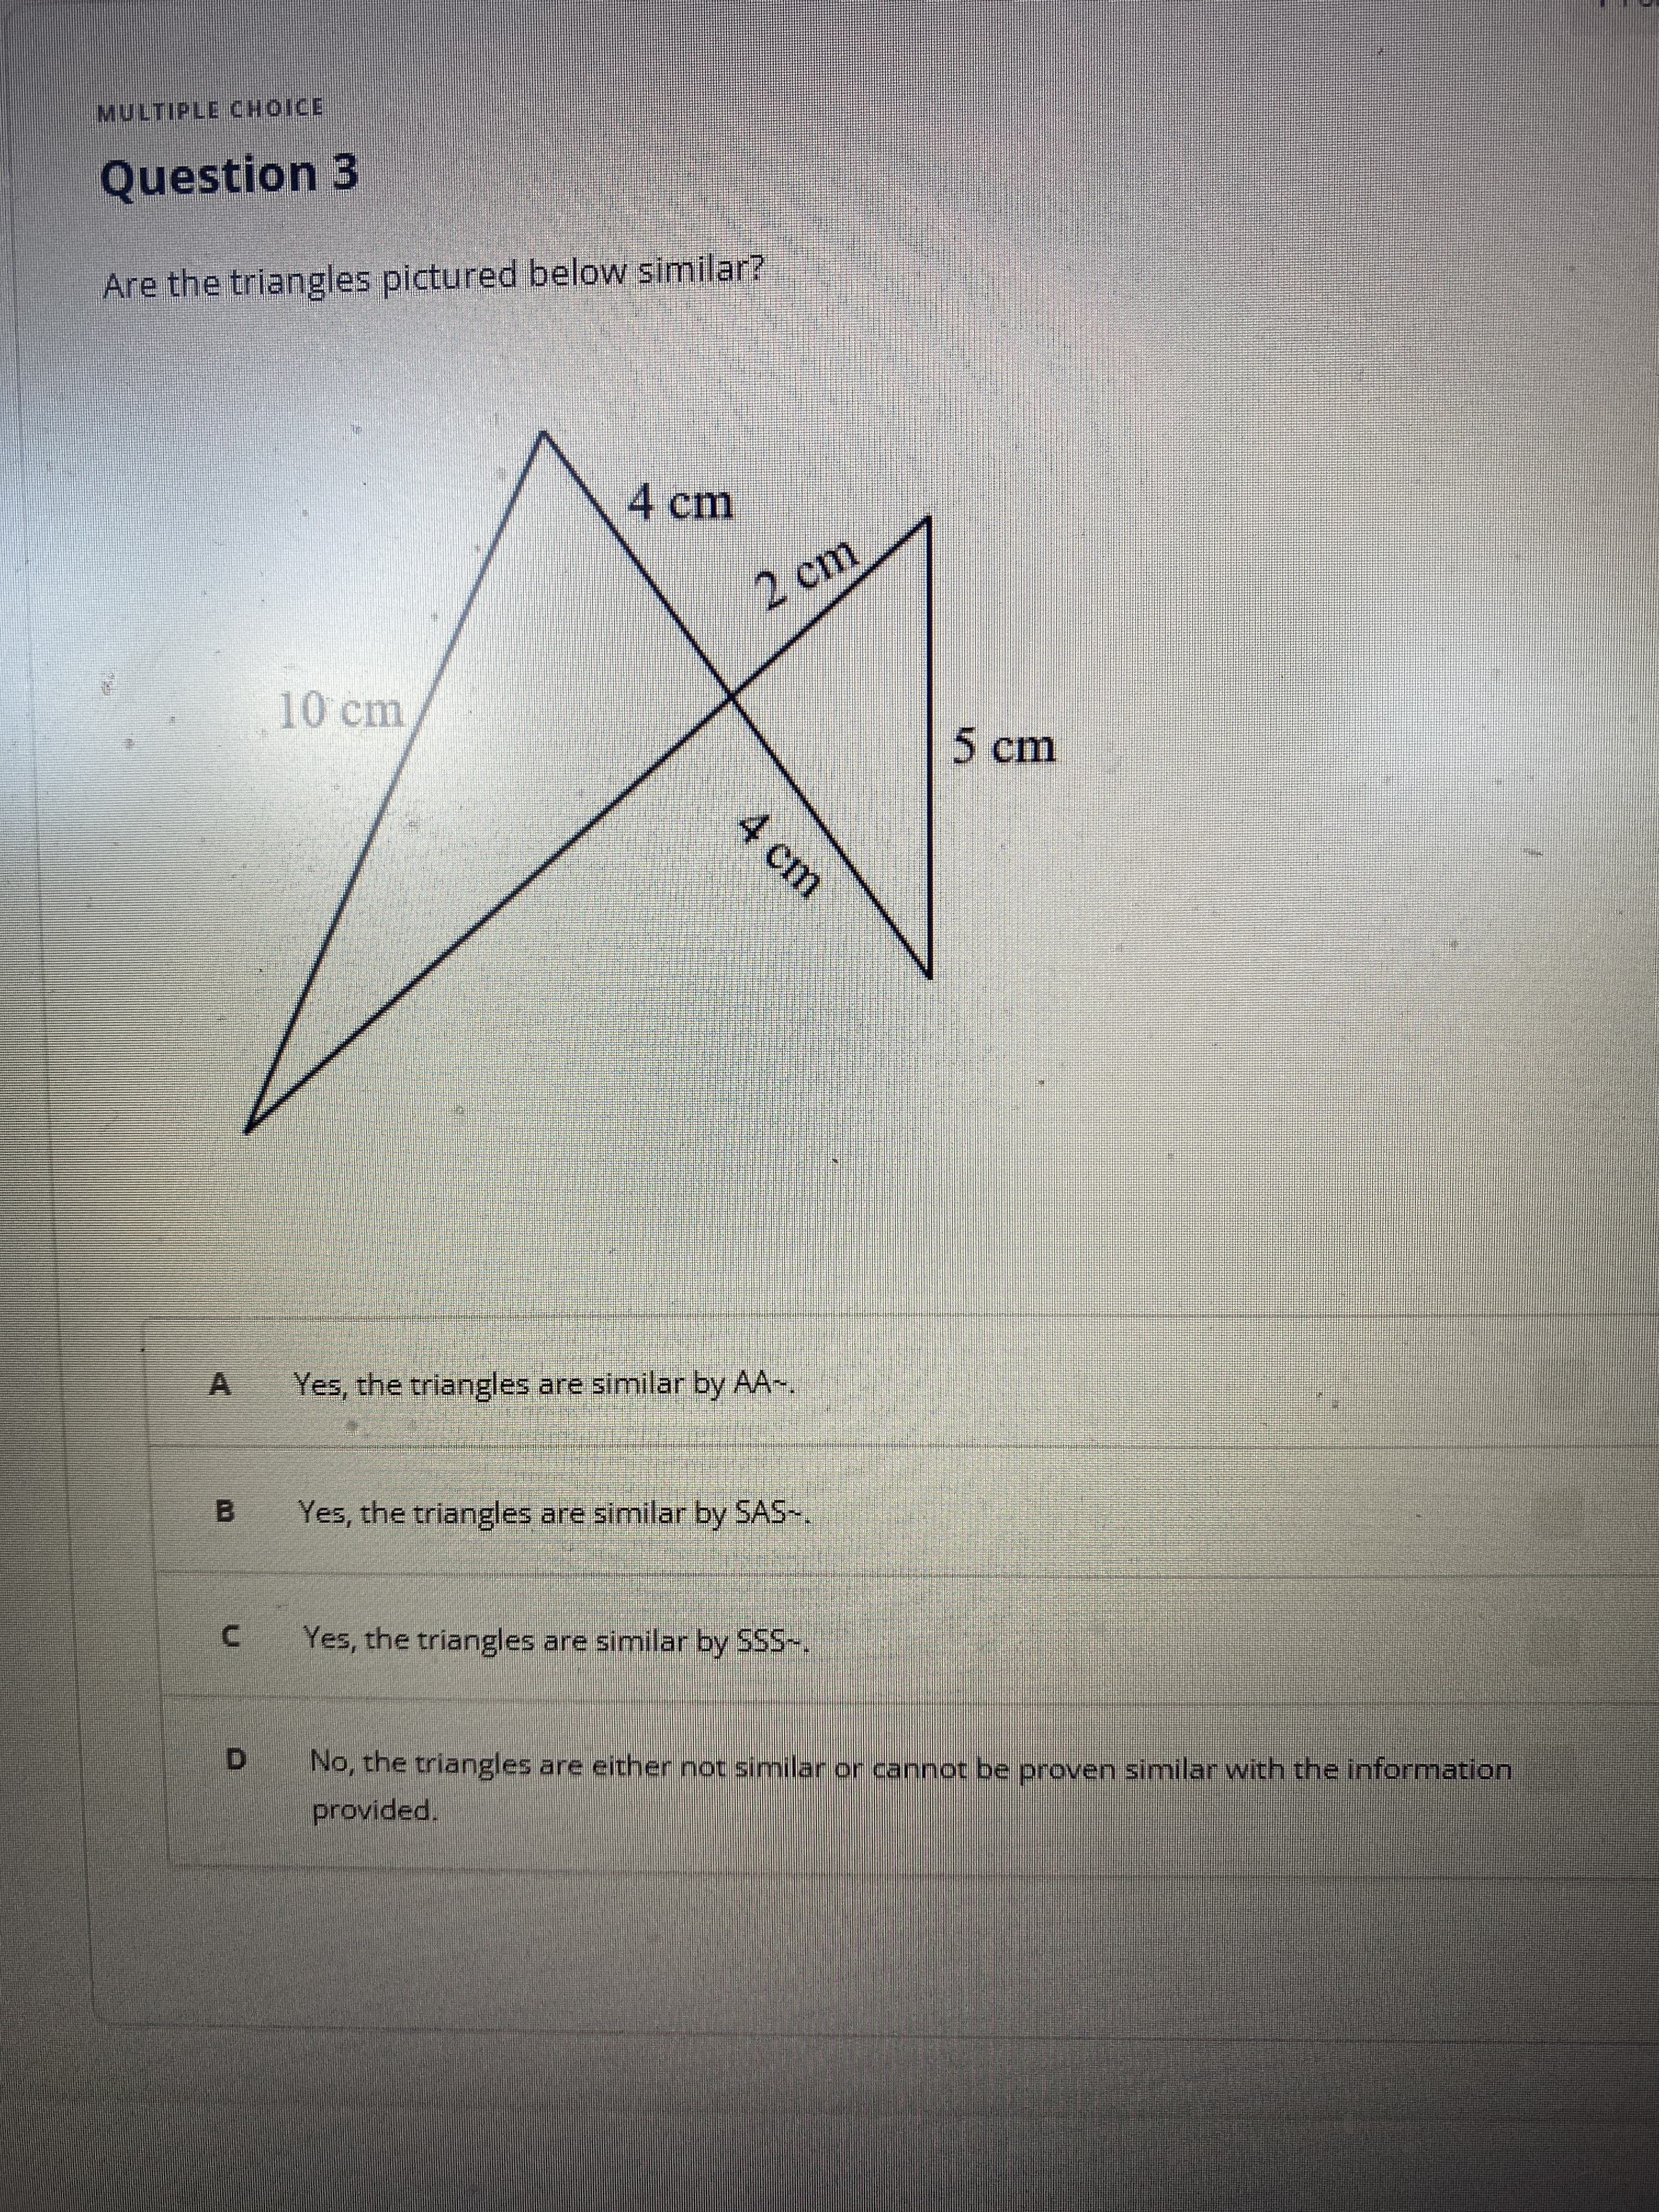 MULTIPLE CHOICE
Question 3
Are the triangles pictured below similar?
4 cm
2 cm
10cm
5cm
4 cm
A Yes, the triangles are similar by AA-,
B.
Yes, the triangles are similar by SAS-.
Yes, the triangles are similar by SSS-.
D.
No, the triangles are either not similar or cannot be proven similar with the information
provided.
